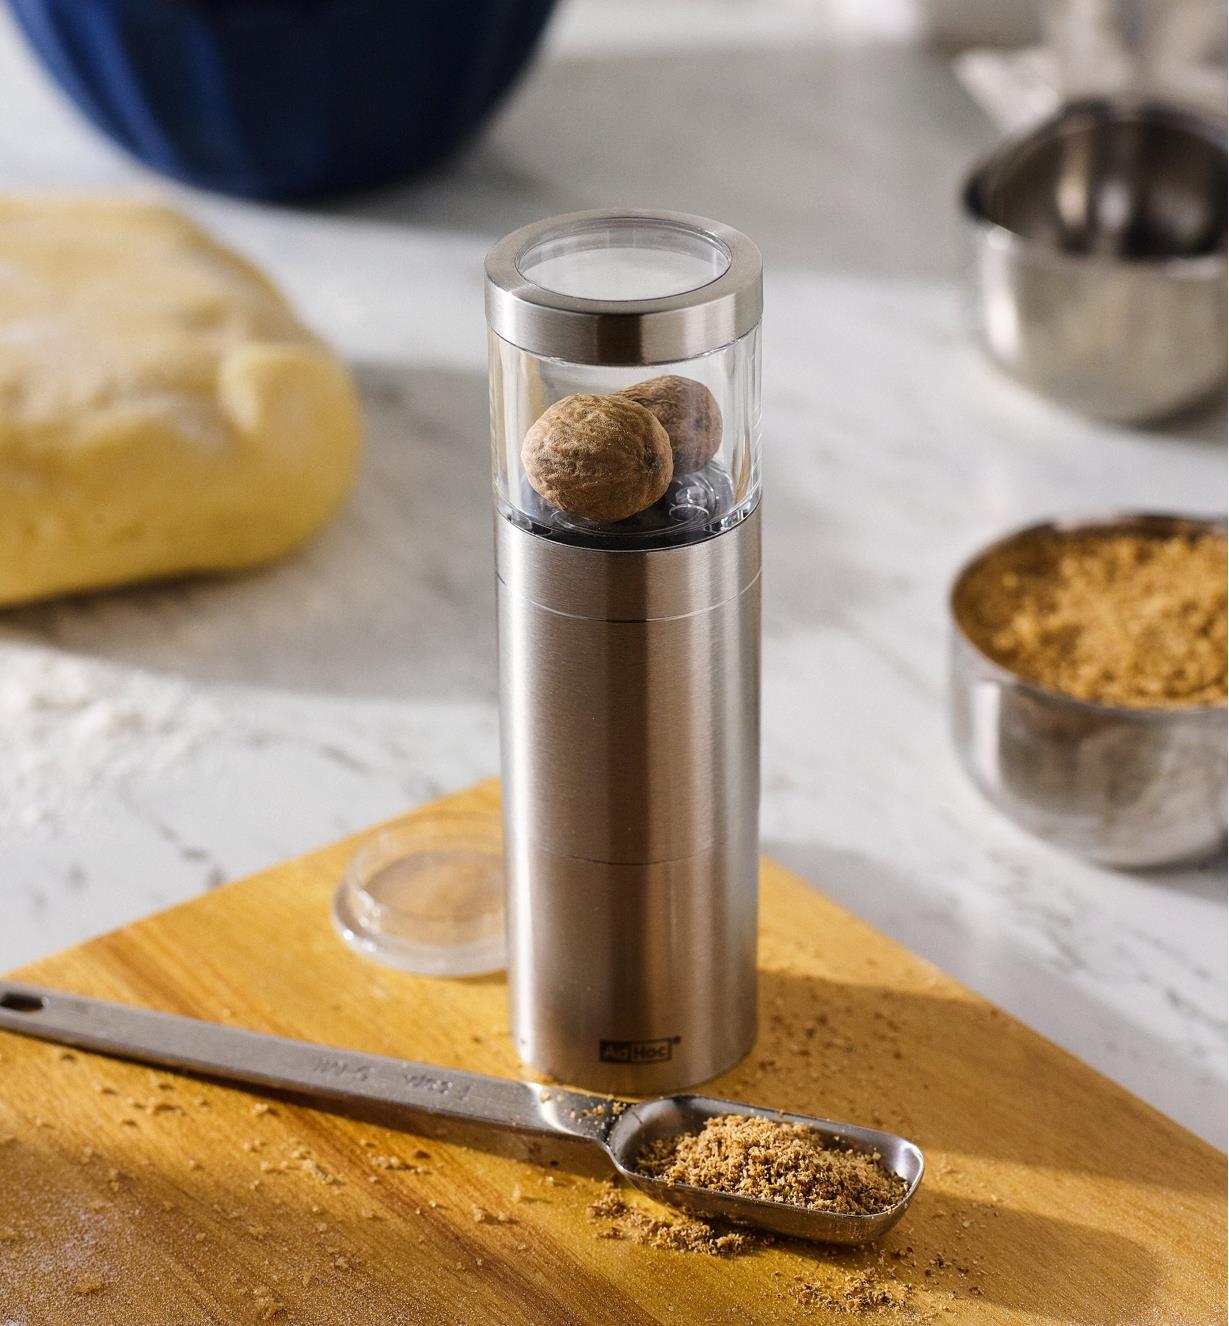 Nutmeg grinder on a cutting board with a measuring spoon of ground nutmeg